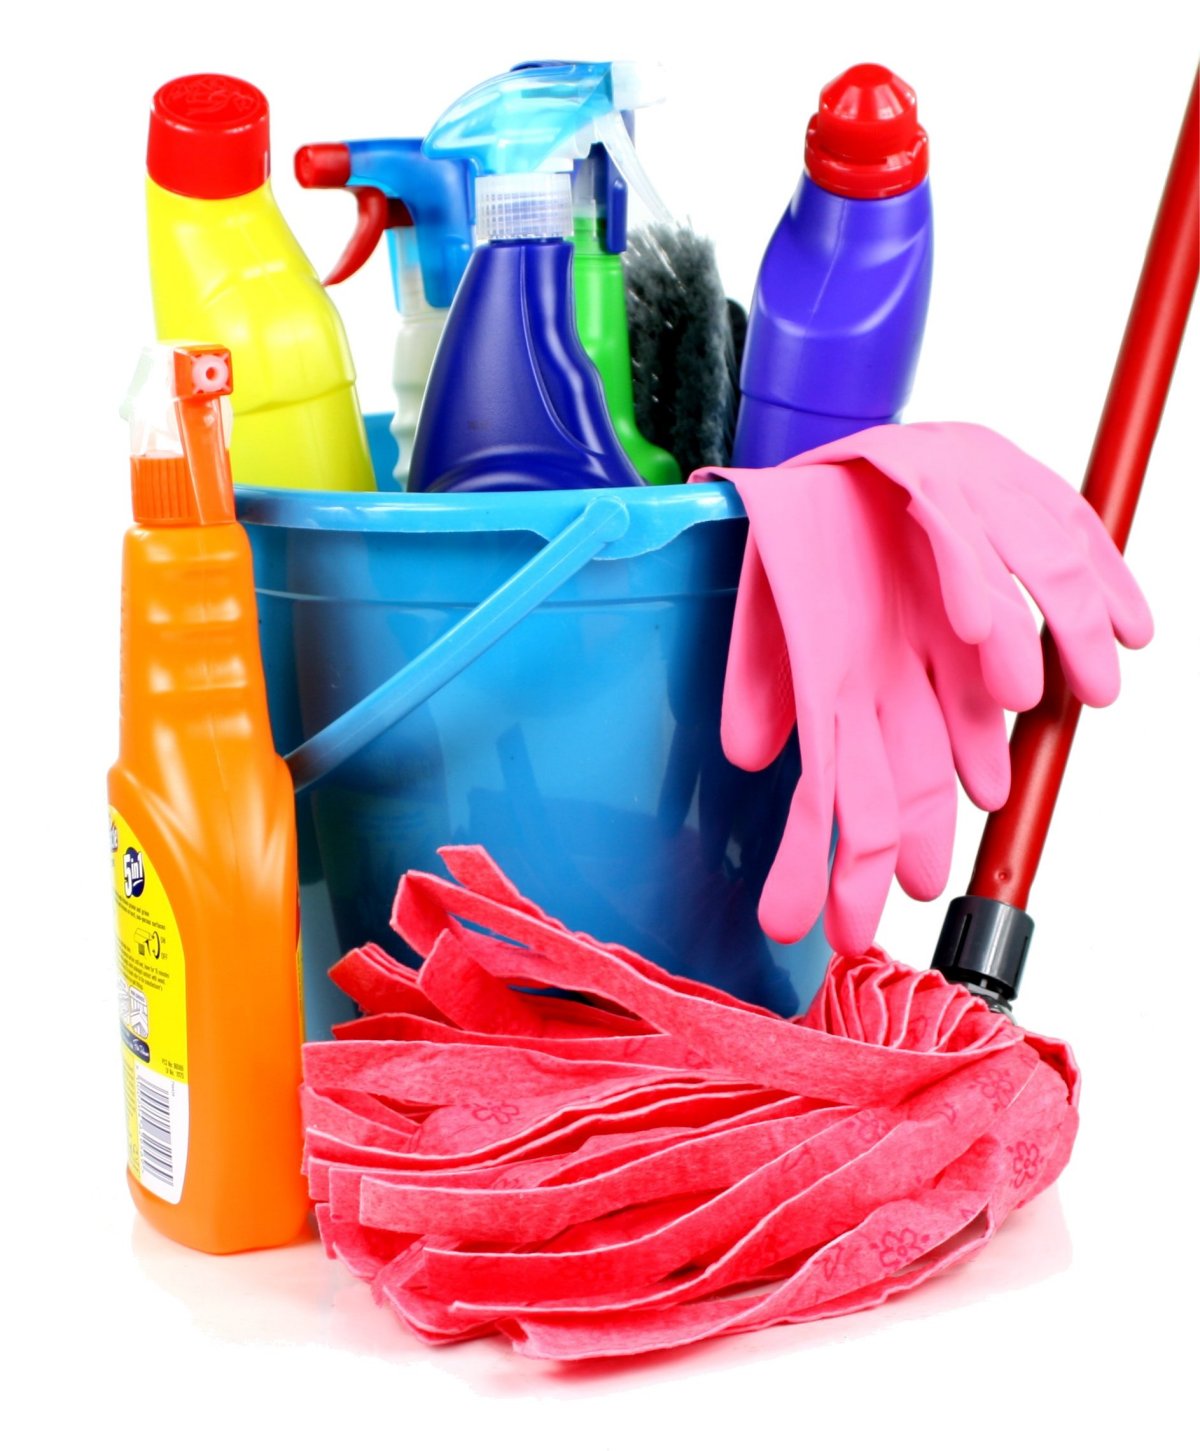 Blue bucket, pink mop and multiple bottles of cleaning products